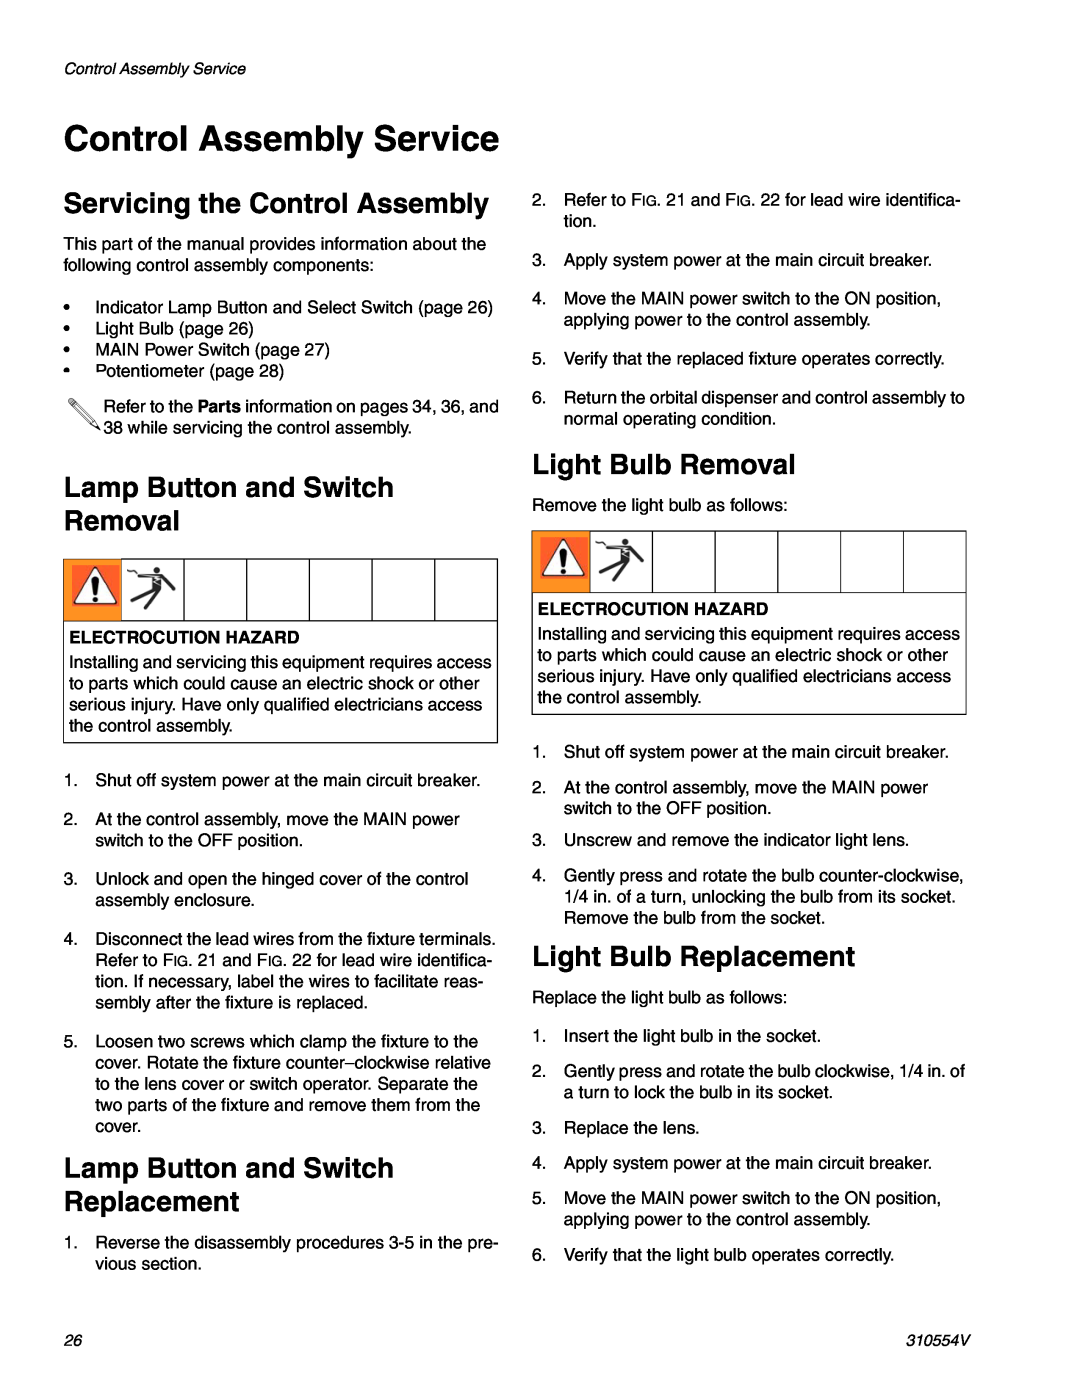 Graco 310554V Control Assembly Service, Servicing the Control Assembly, Lamp Button and Switch Removal, Light Bulb Removal 